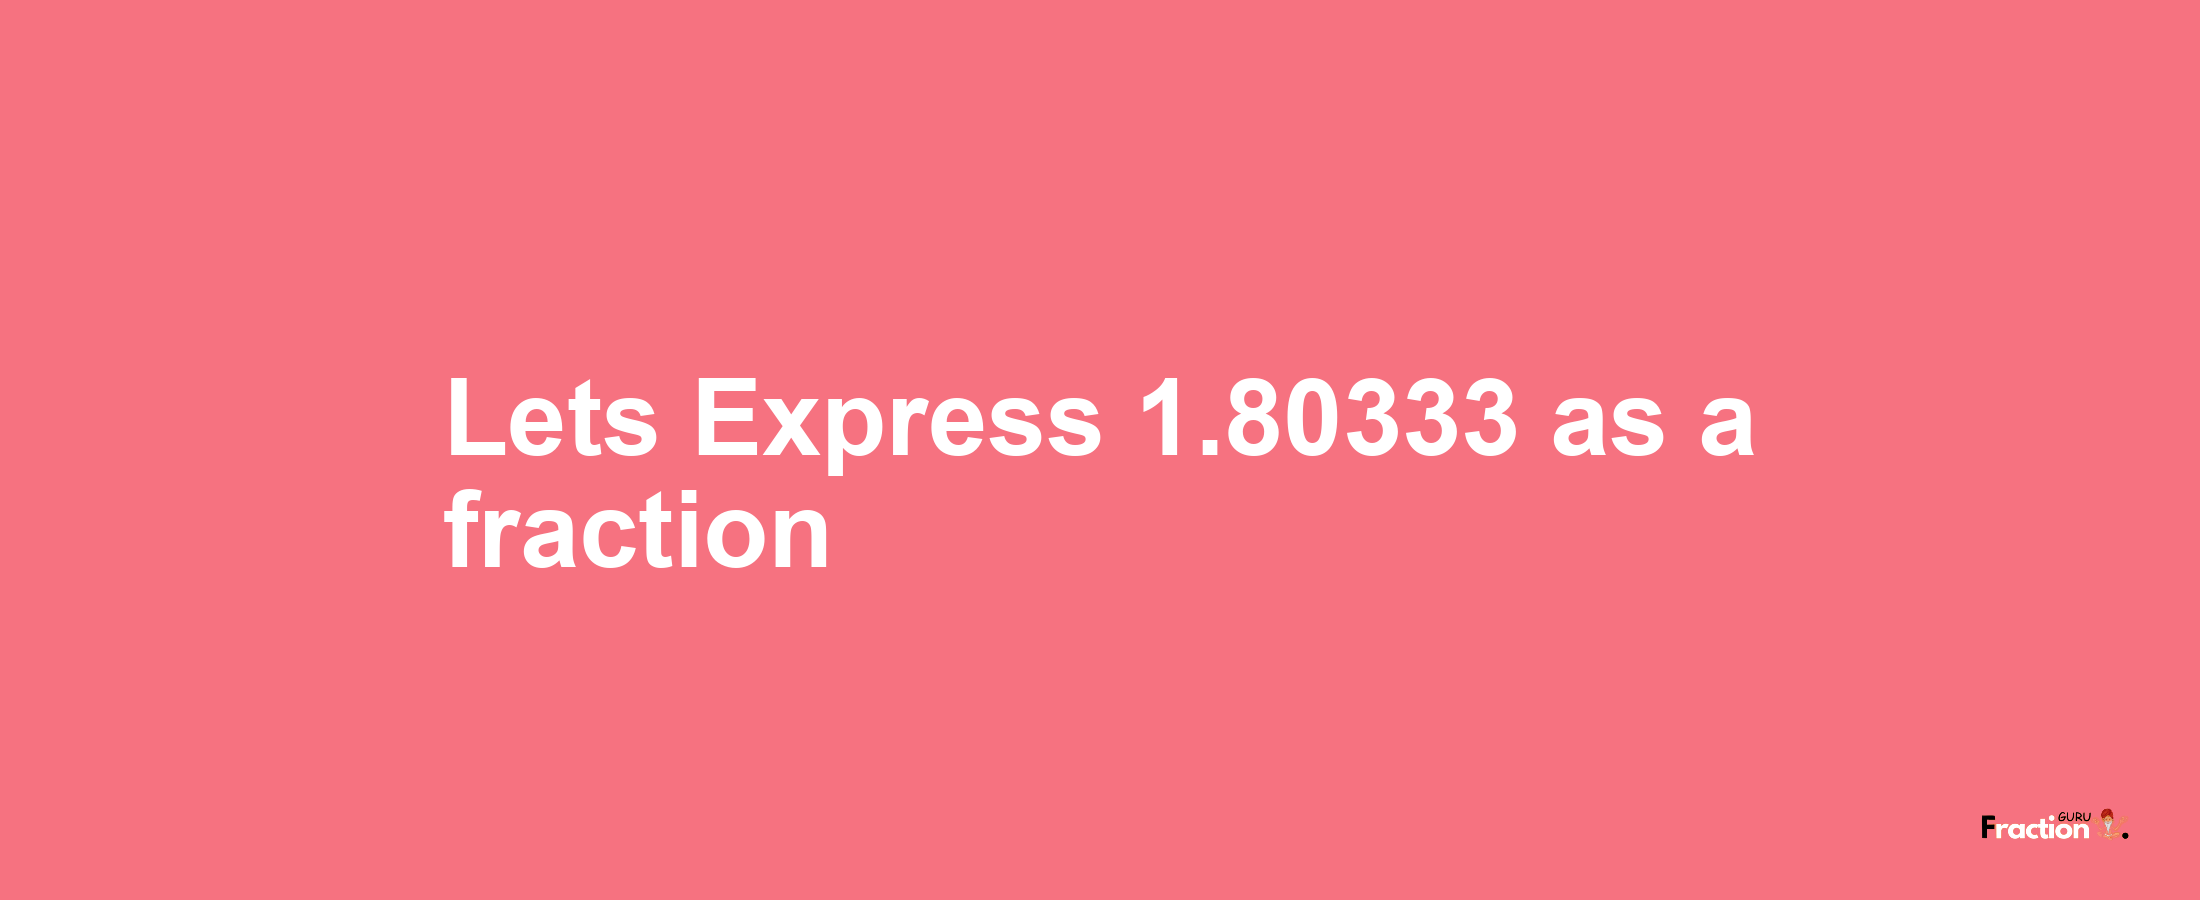 Lets Express 1.80333 as afraction